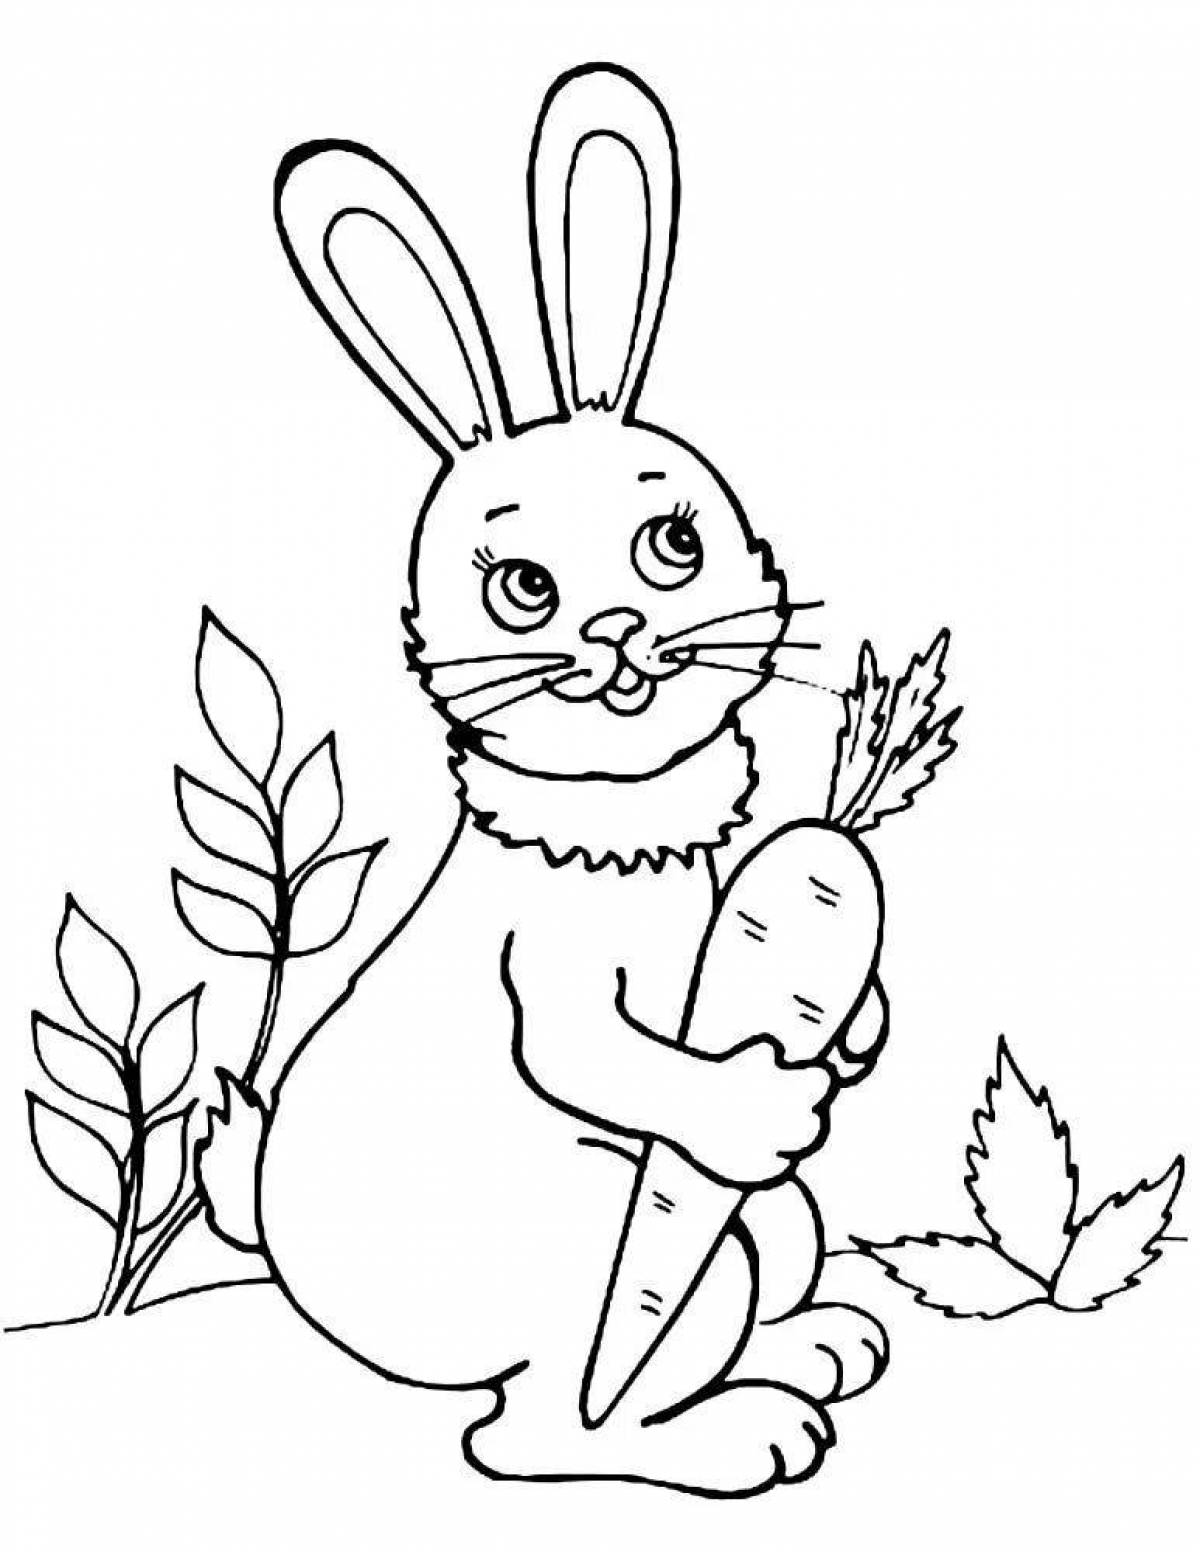 Exciting bunny coloring book